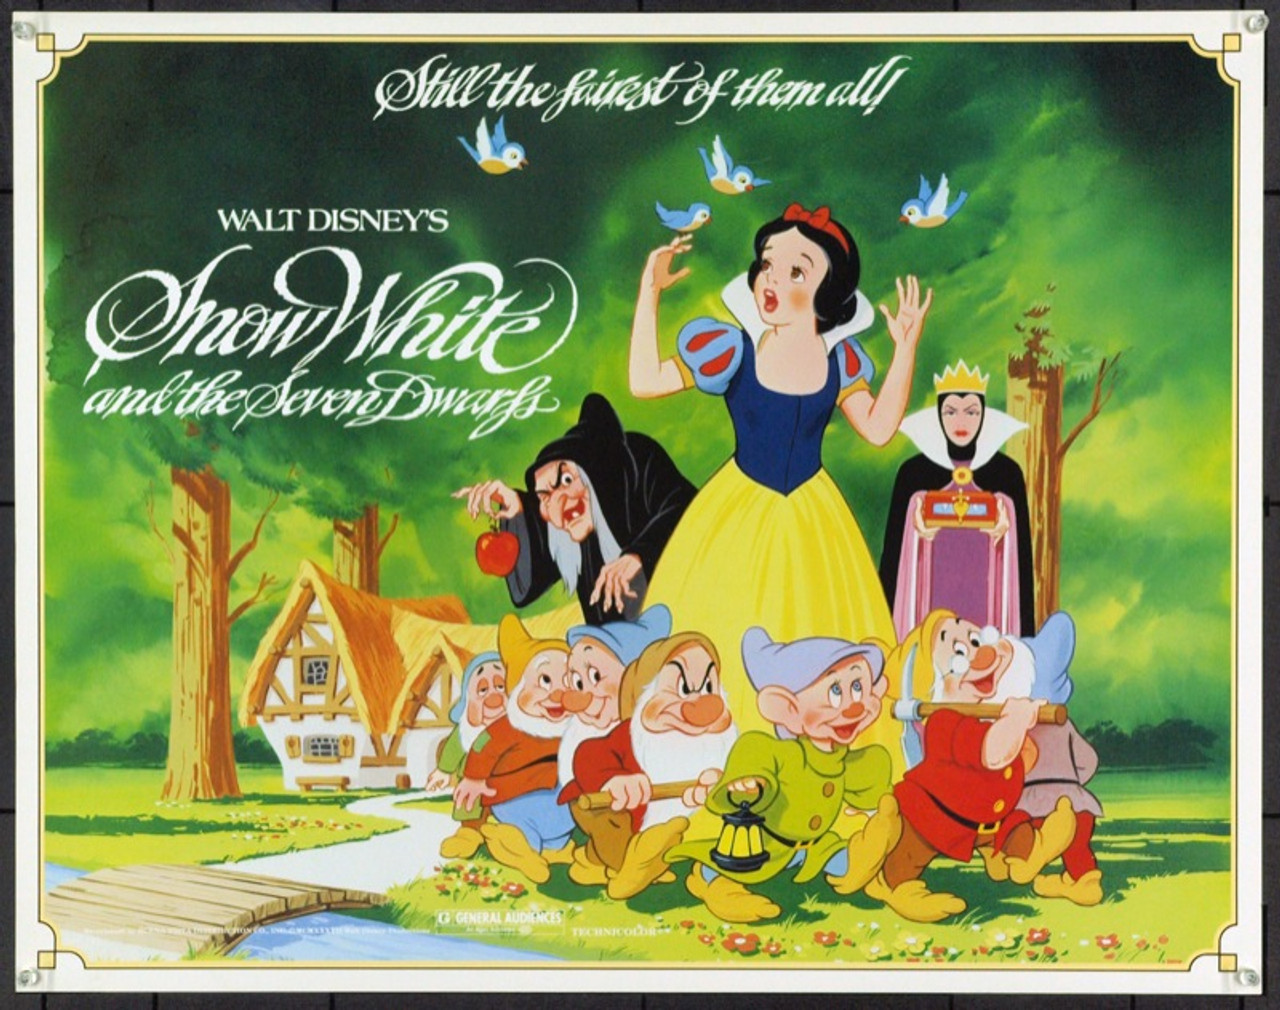 Original Snow White And The Seven Dwarfs (1937) movie poster in VF+  condition for $115.00